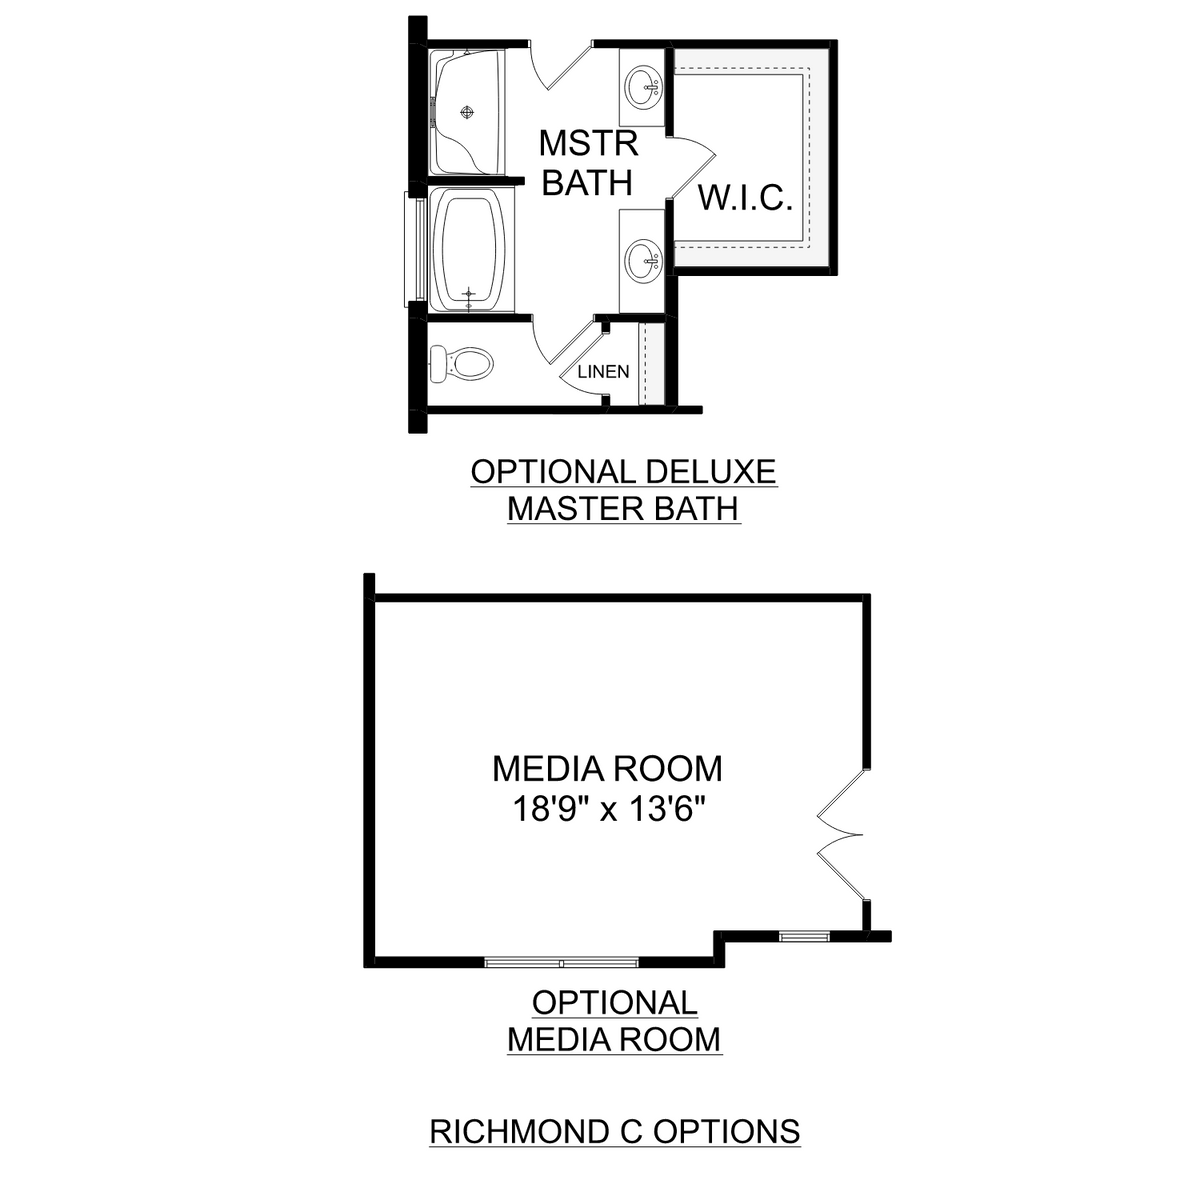 3 - The Richmond C floor plan layout for 2160 McAfee Rd in Davidson Homes' The Reserve at North Ridge community.